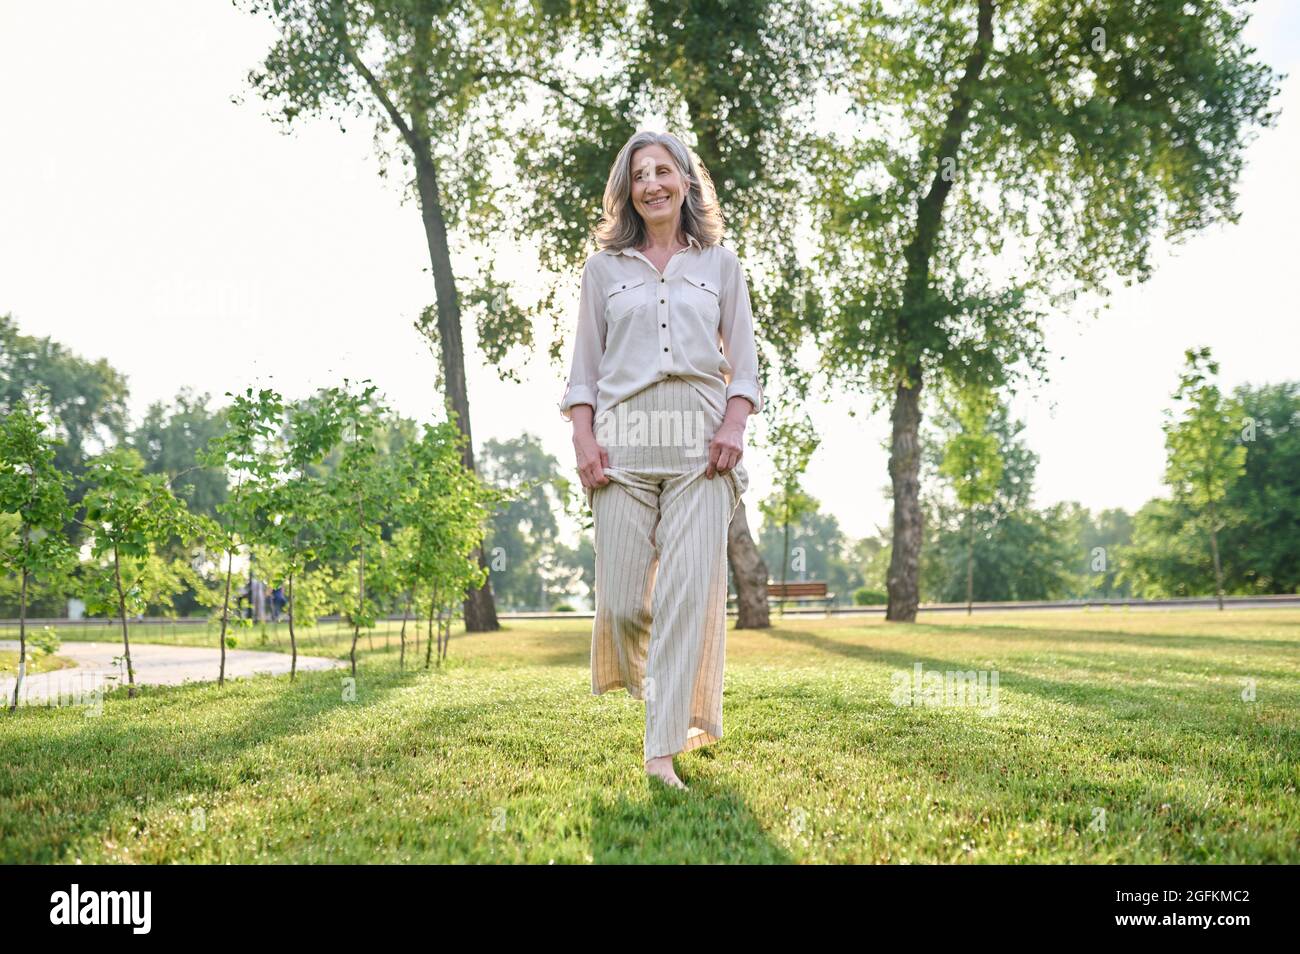 Woman walking barefoot on grass in park Stock Photo